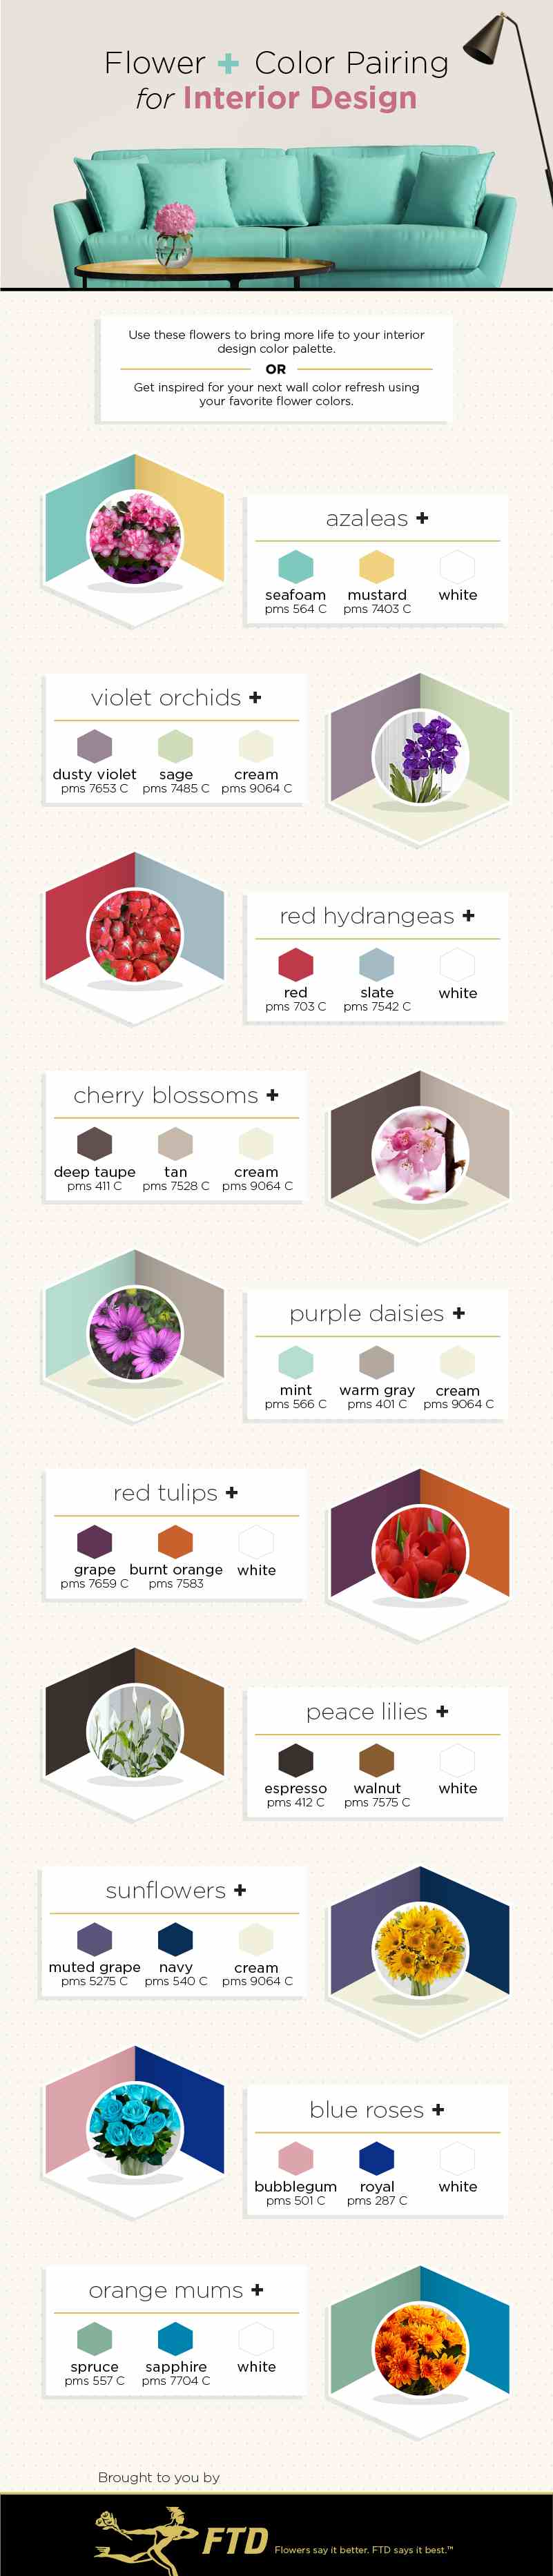 Flower and Paint Pairing Guide 